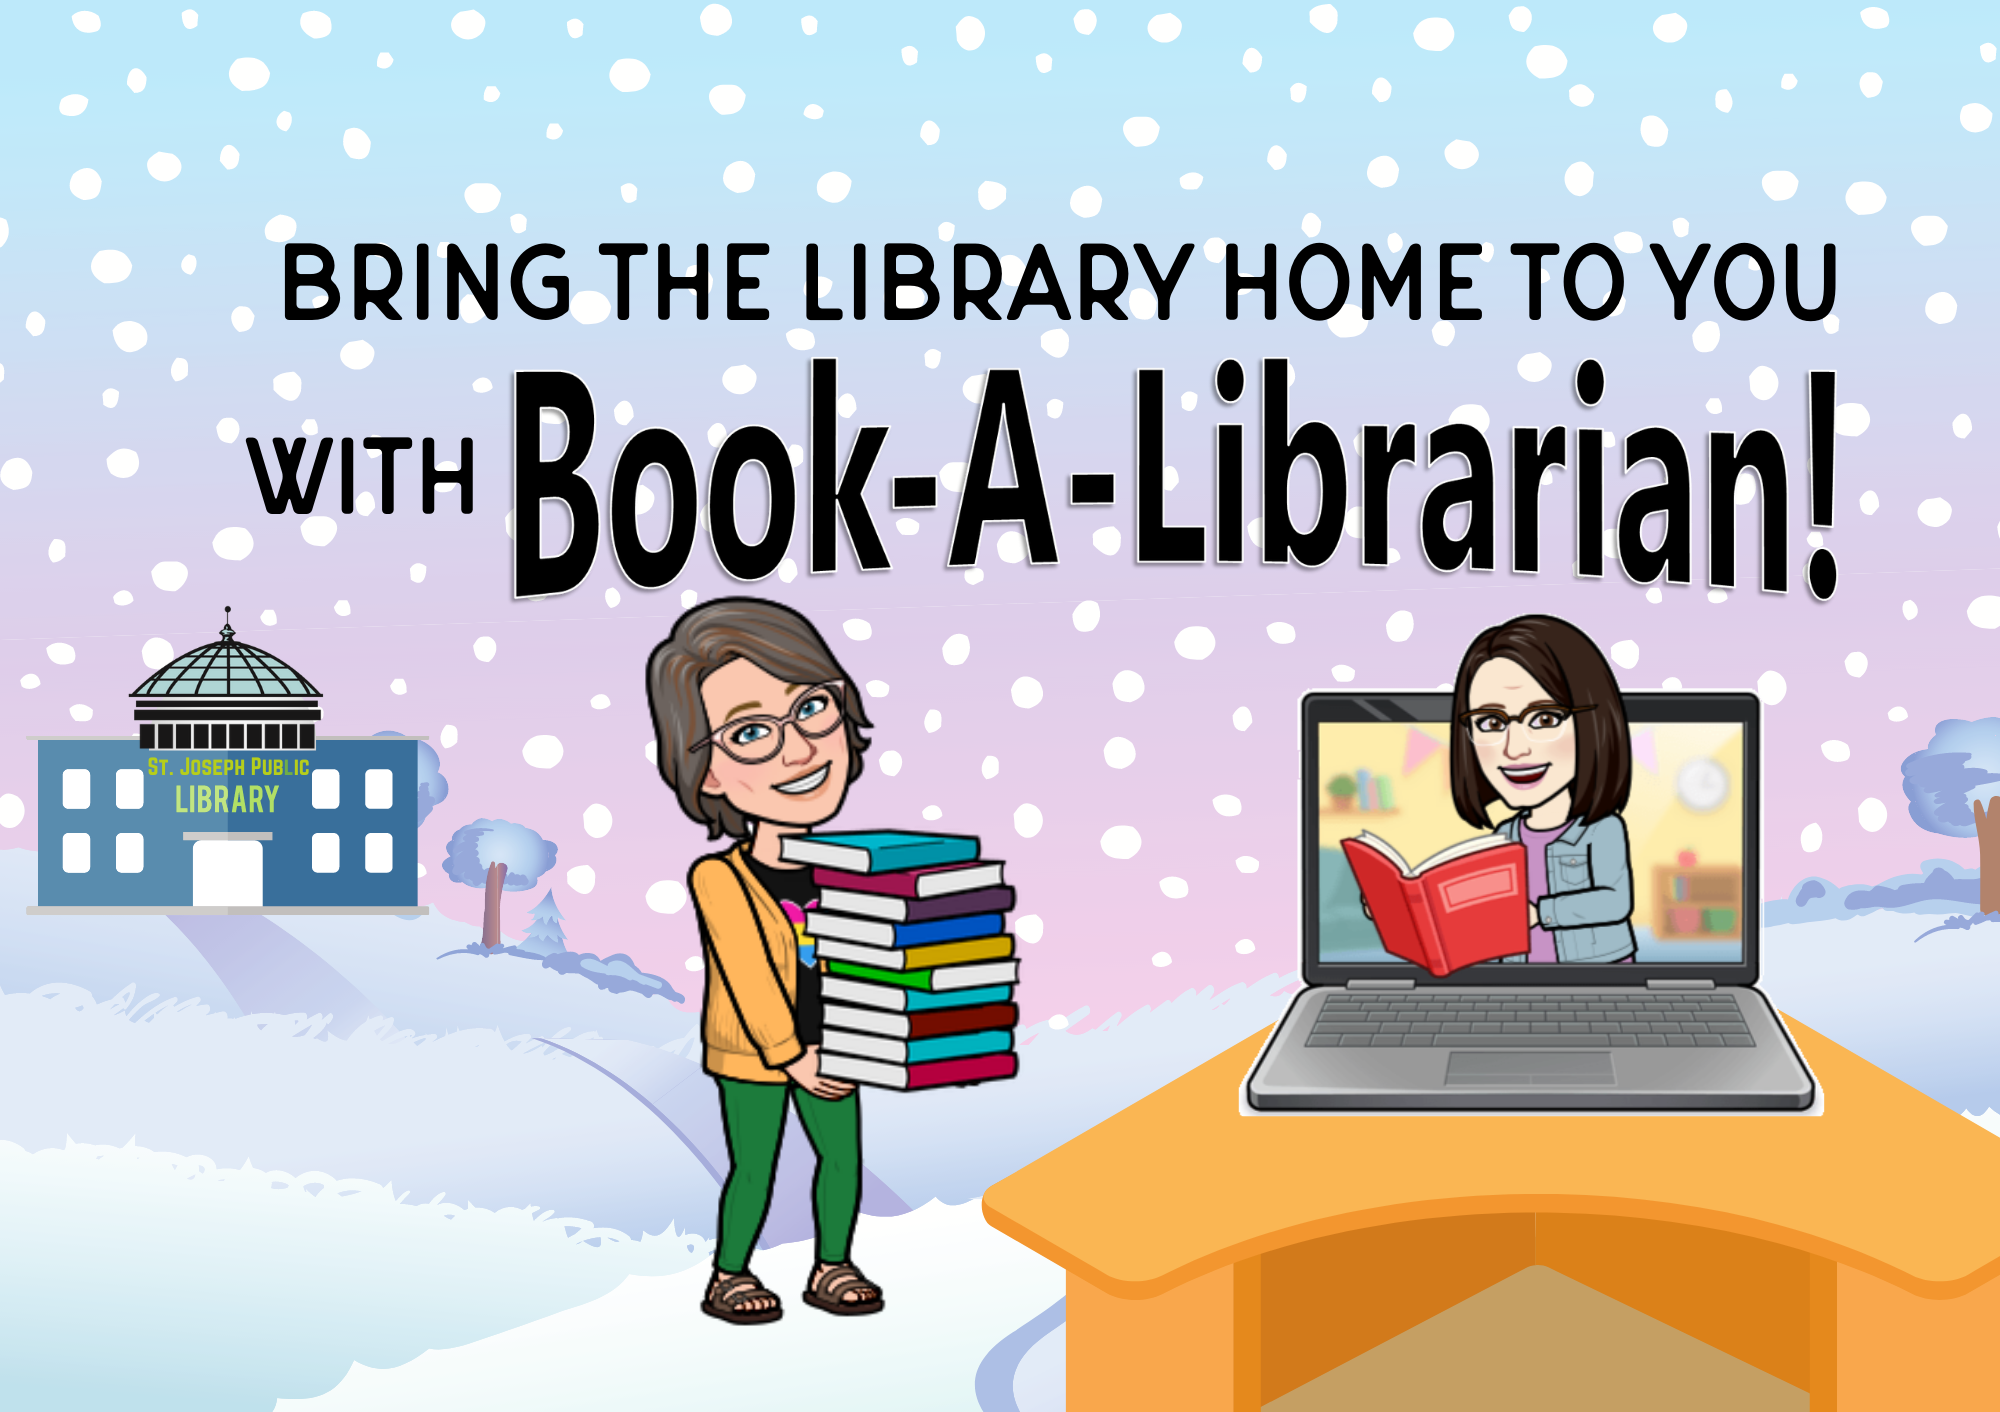 Bring the library home to you with Book-A-Librarian